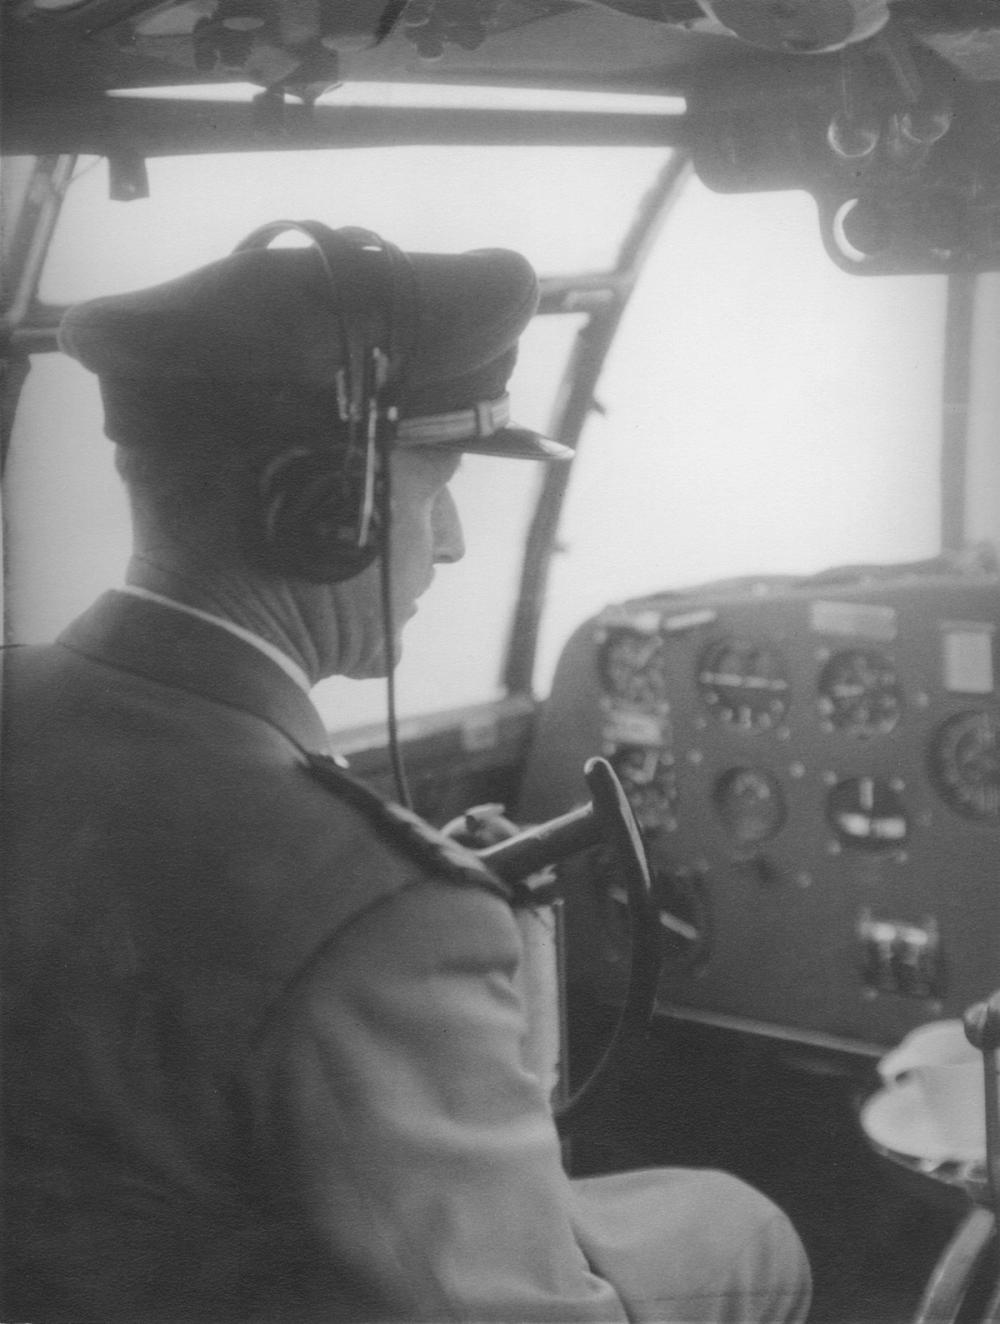 Pilot in uniform sits in a cockpit of a plane wearing headphones. The photograph is black and white.